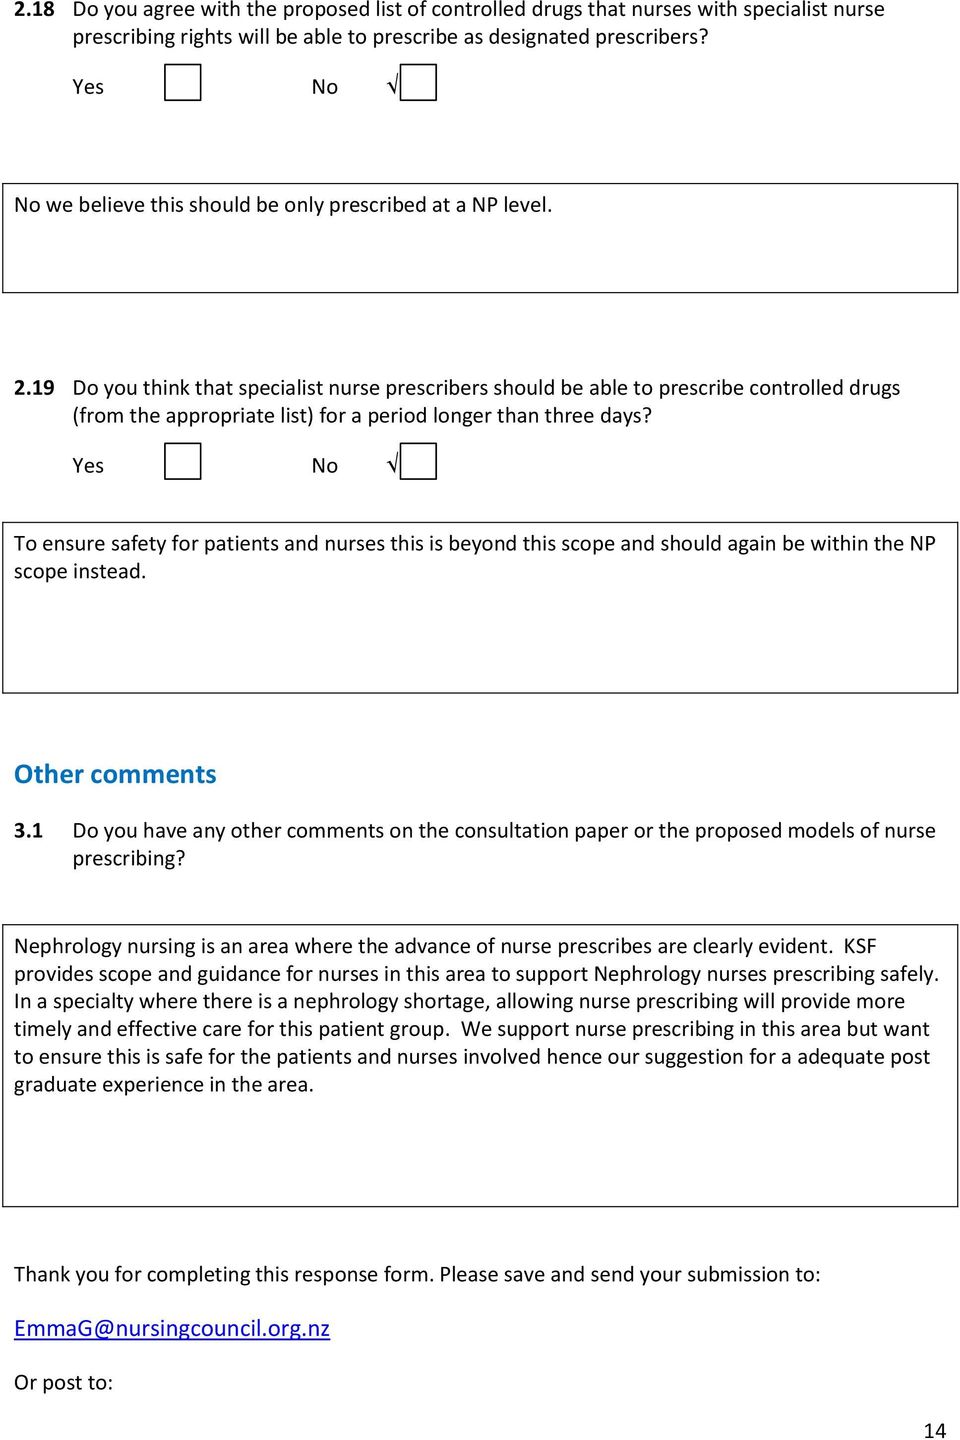 19 Do you think that specialist nurse prescribers should be able to prescribe controlled drugs (from the appropriate list) for a period longer than three days?